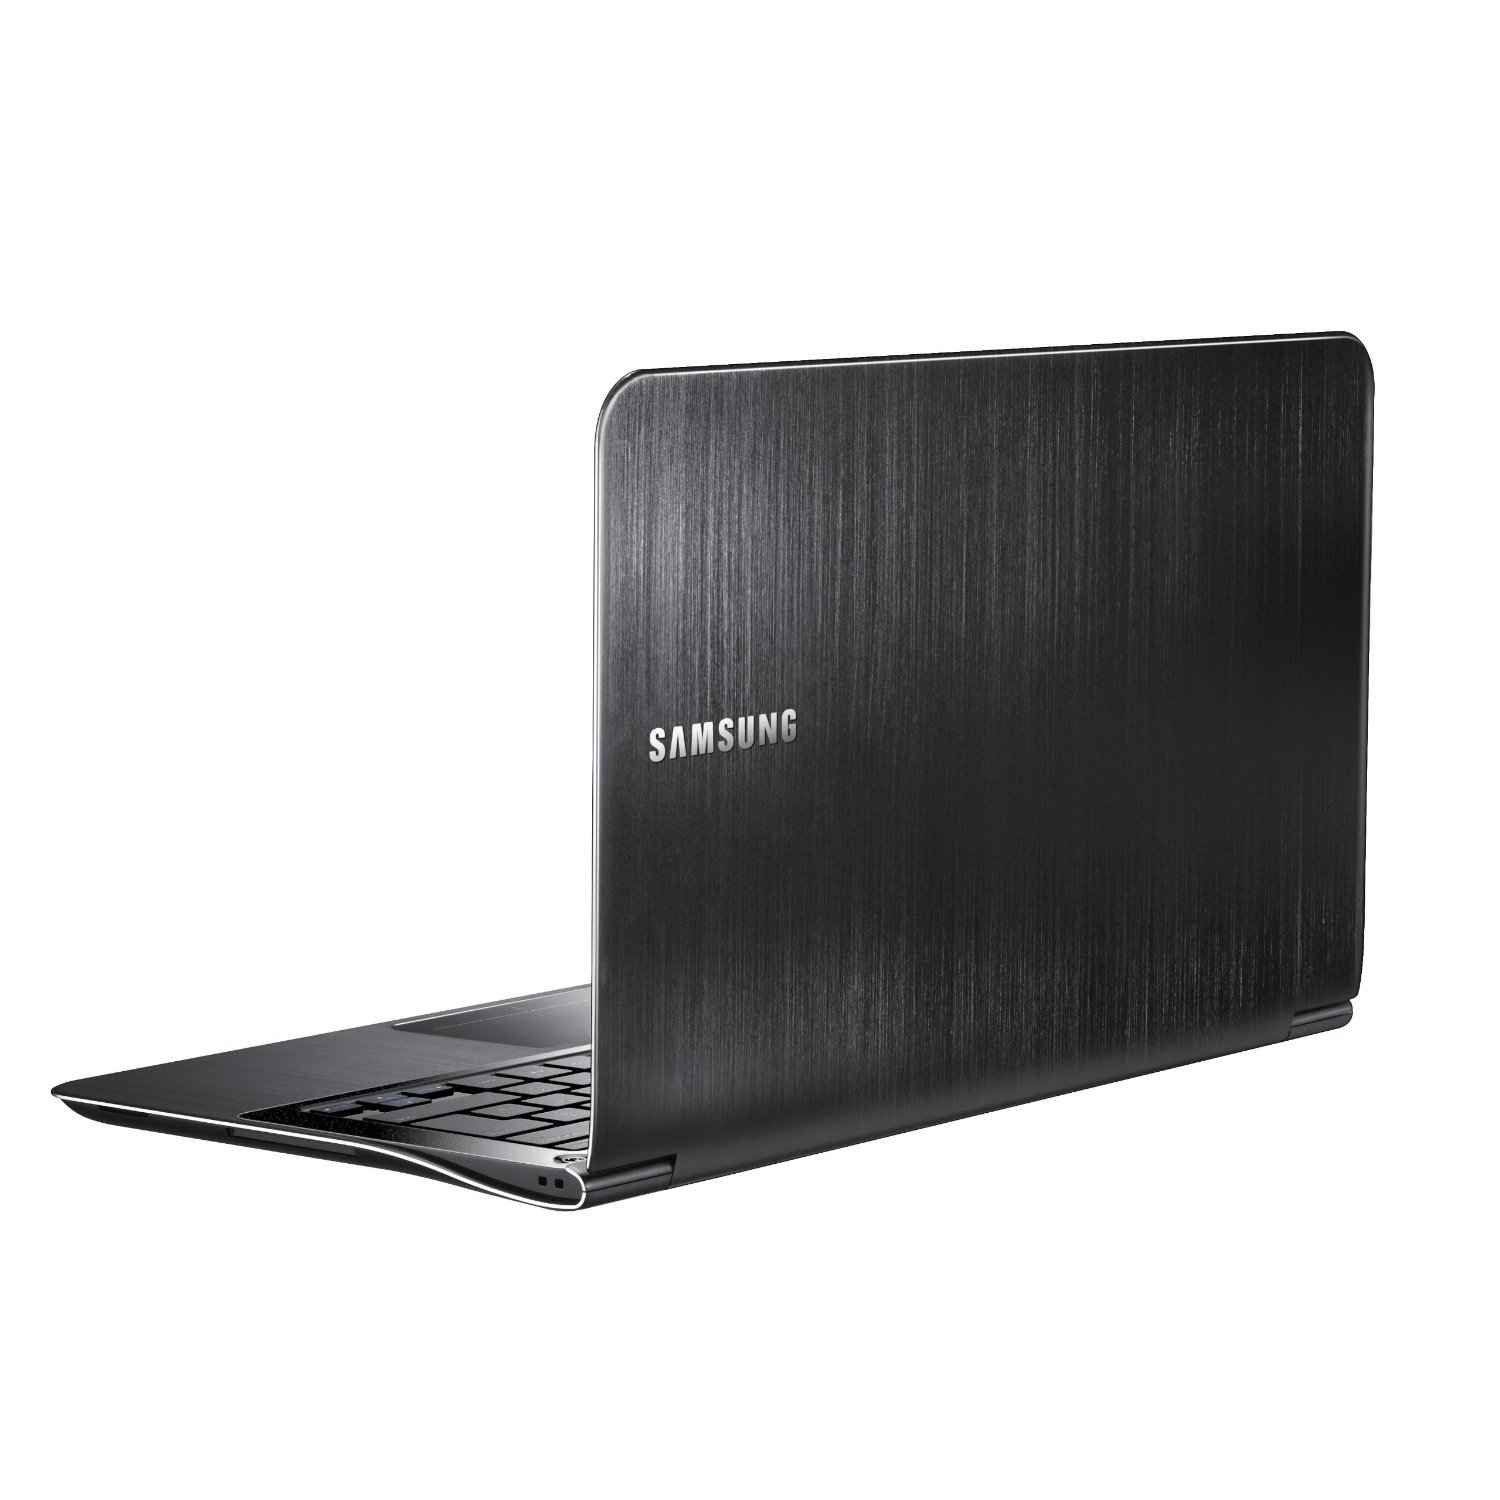 http://thetechjournal.com/wp-content/uploads/images/1108/1313814425-samsung-series-9-np900x1aa01us-116inch-laptop-6.jpg